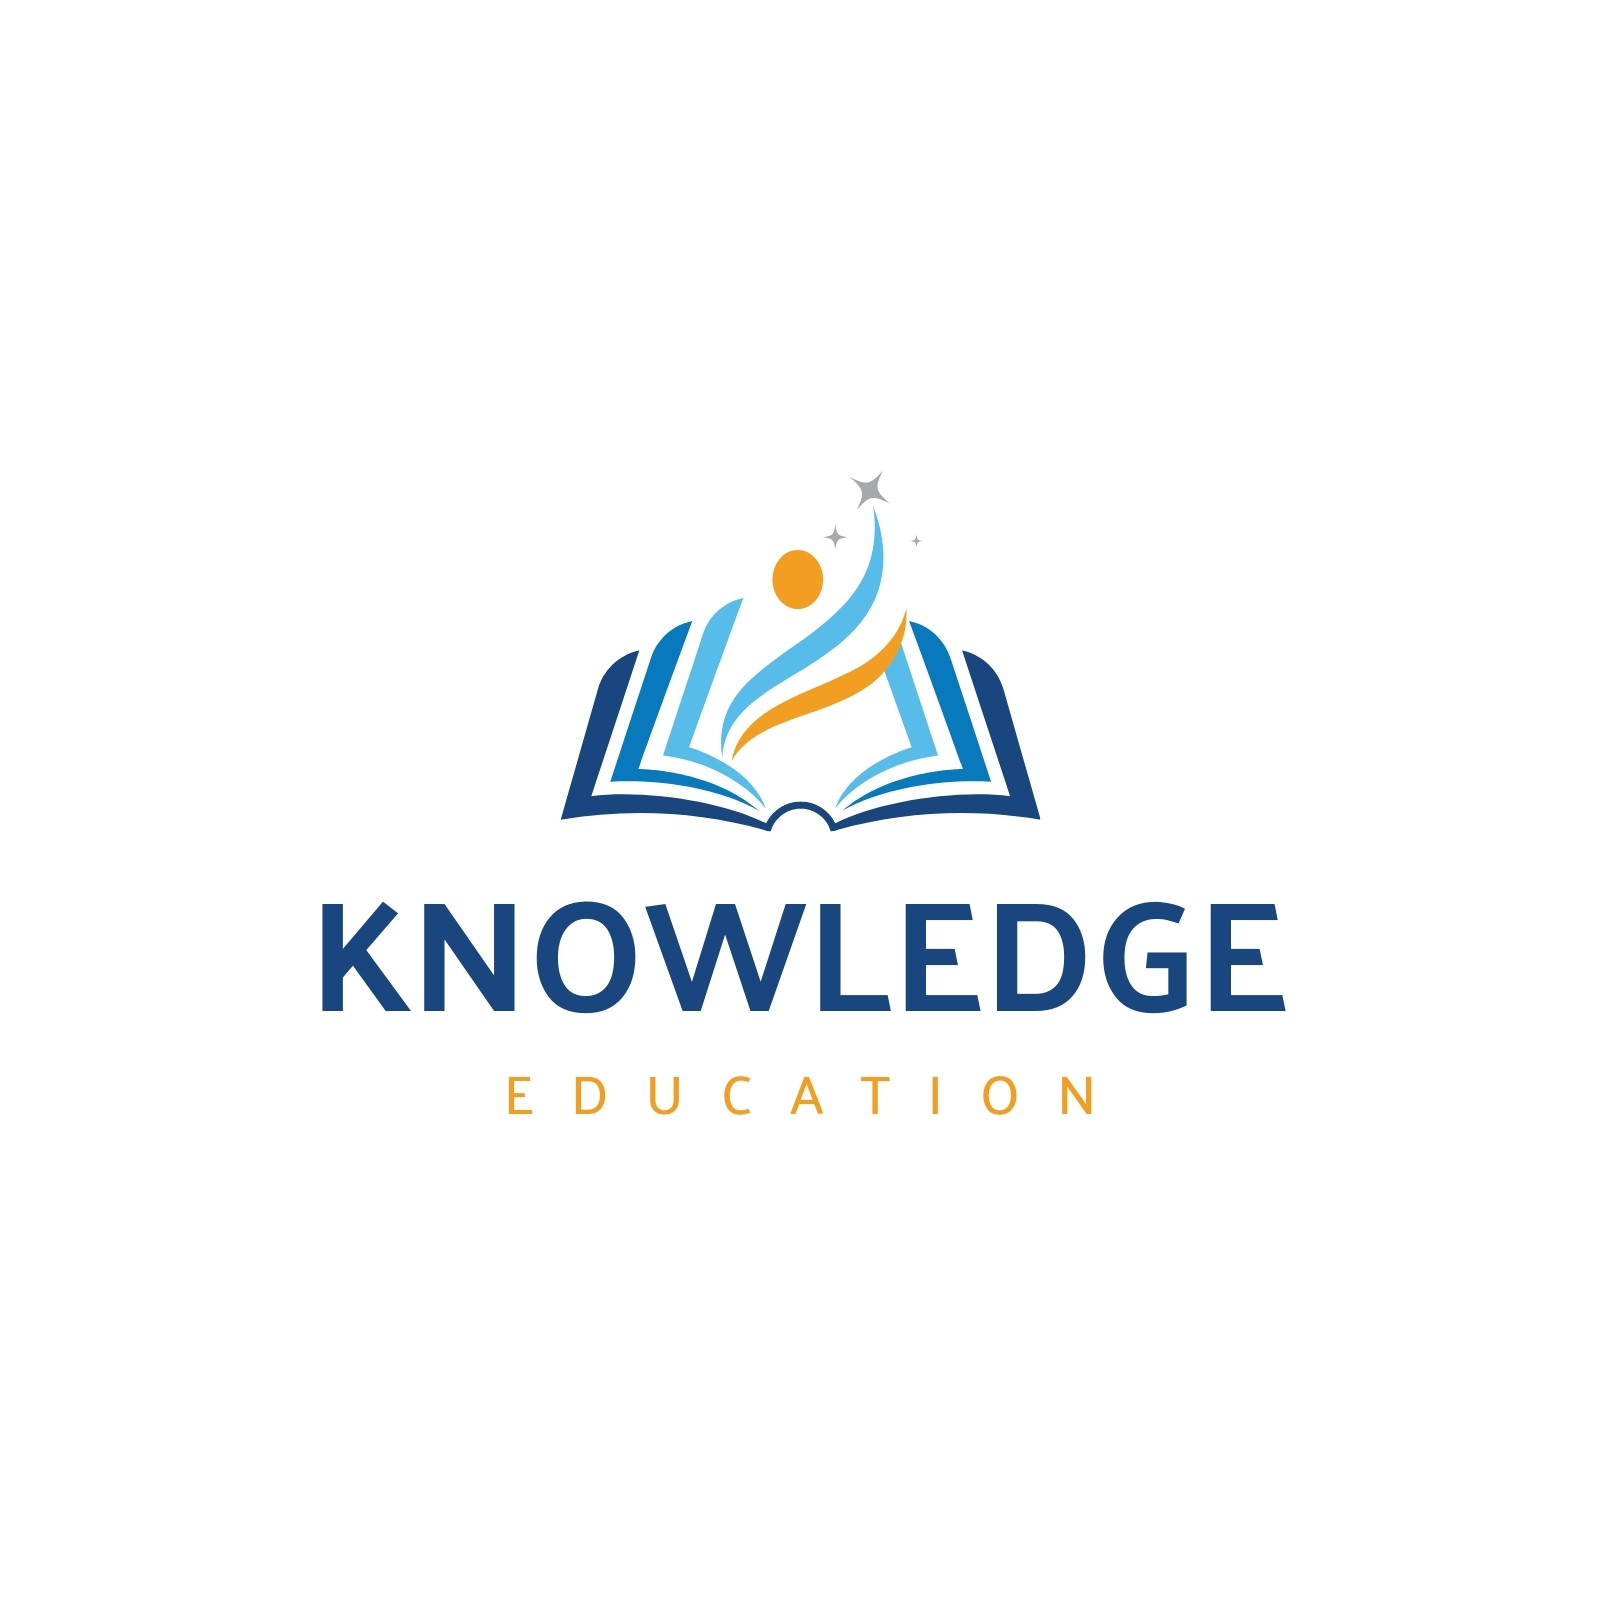 Knowledge | An Open Access Journal from MDPI